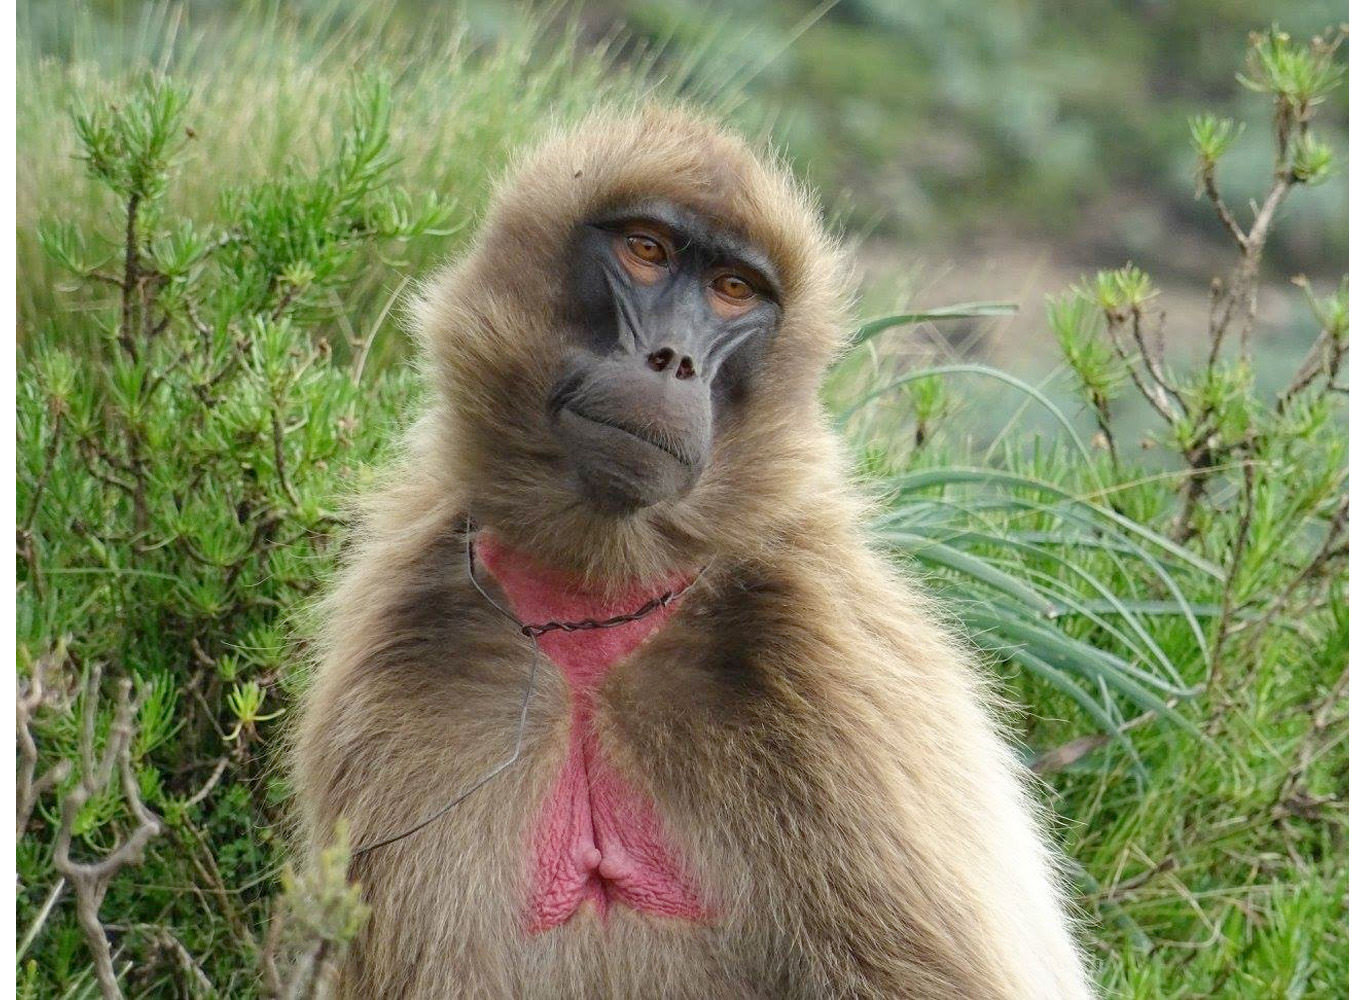 A gelada with a wire snare around its neck.